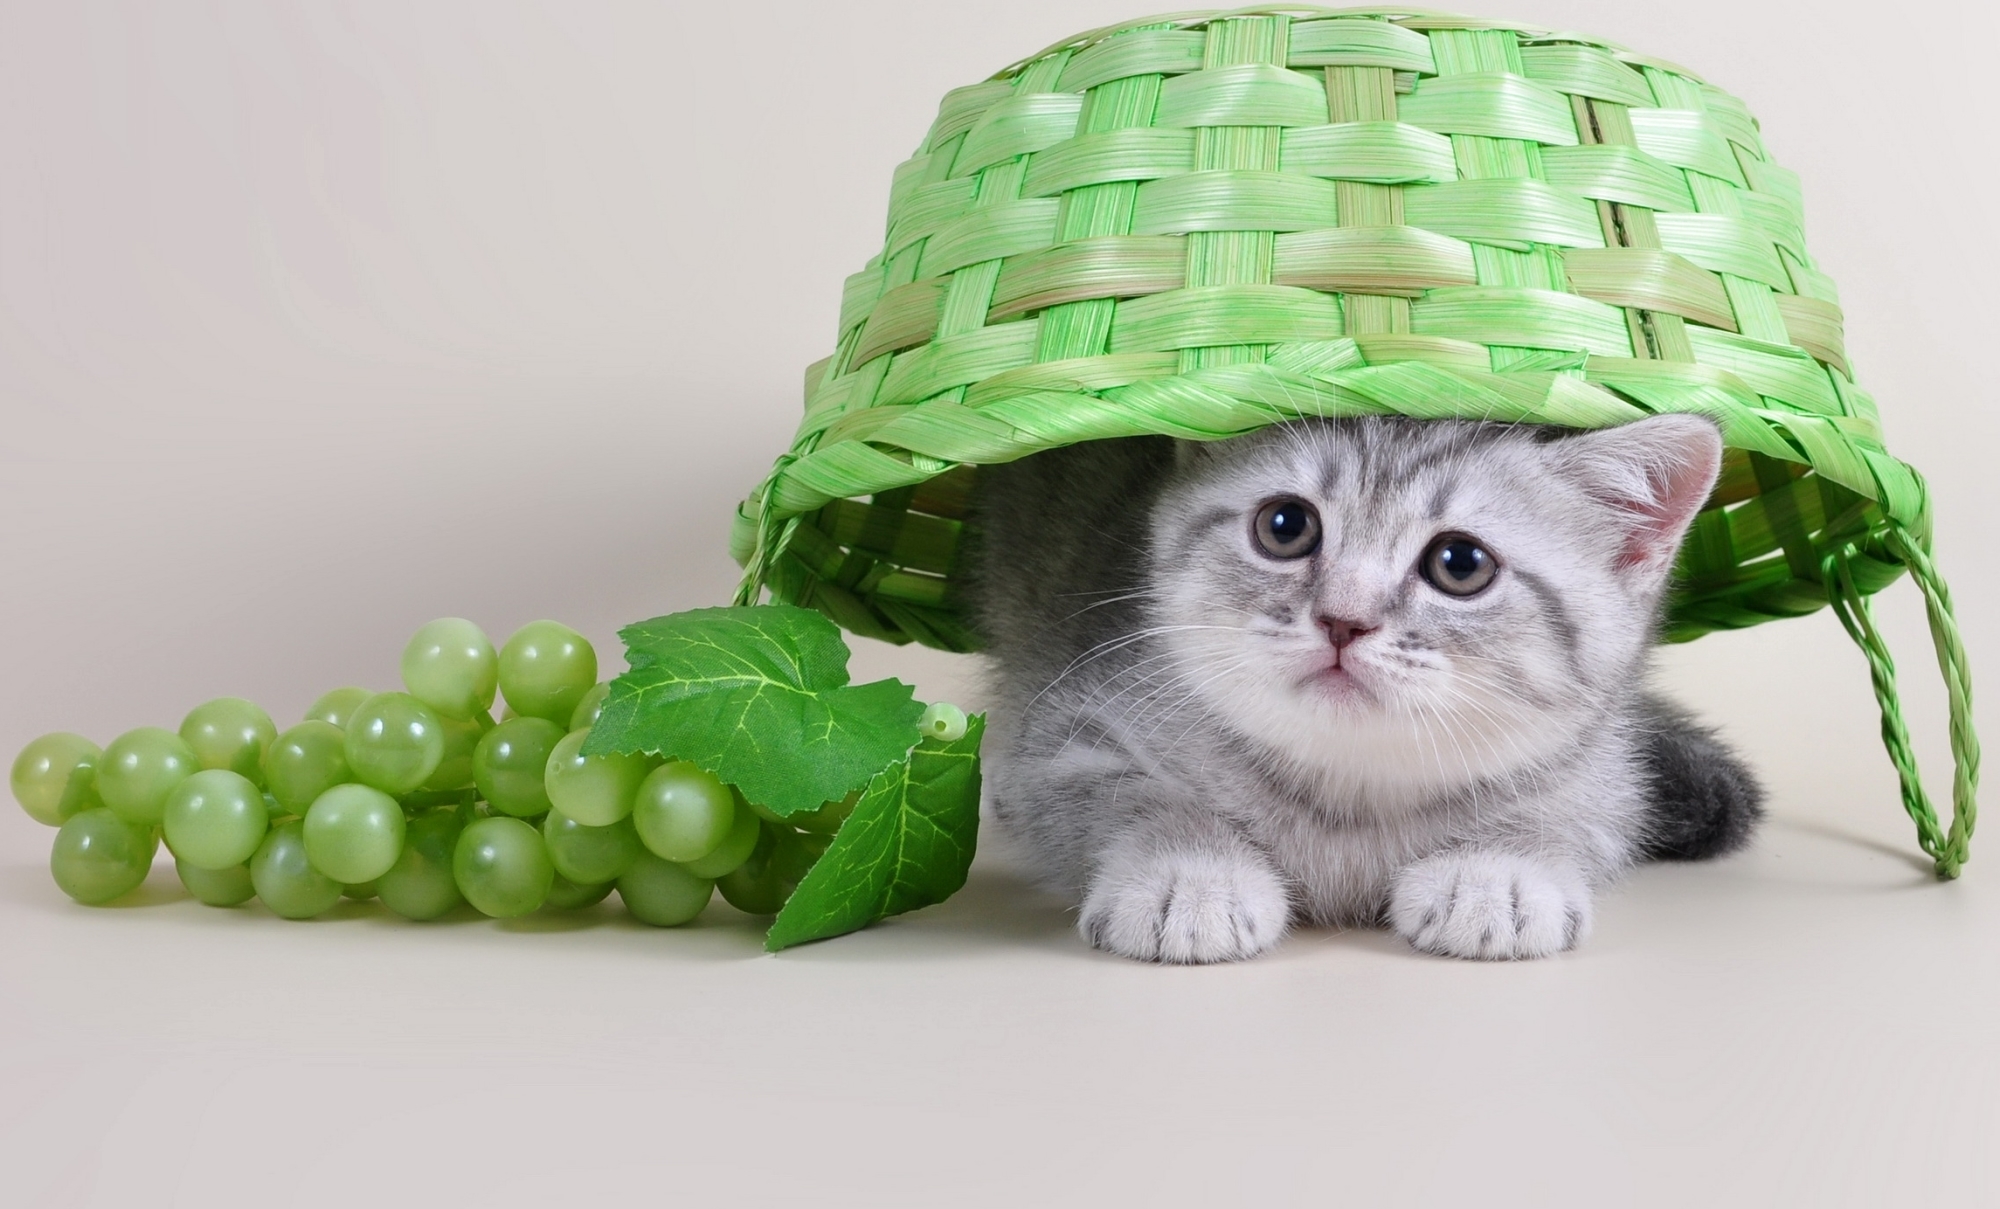 General 2000x1209 animals baskets grapes cats fruit simple background closeup whiskers kittens fur